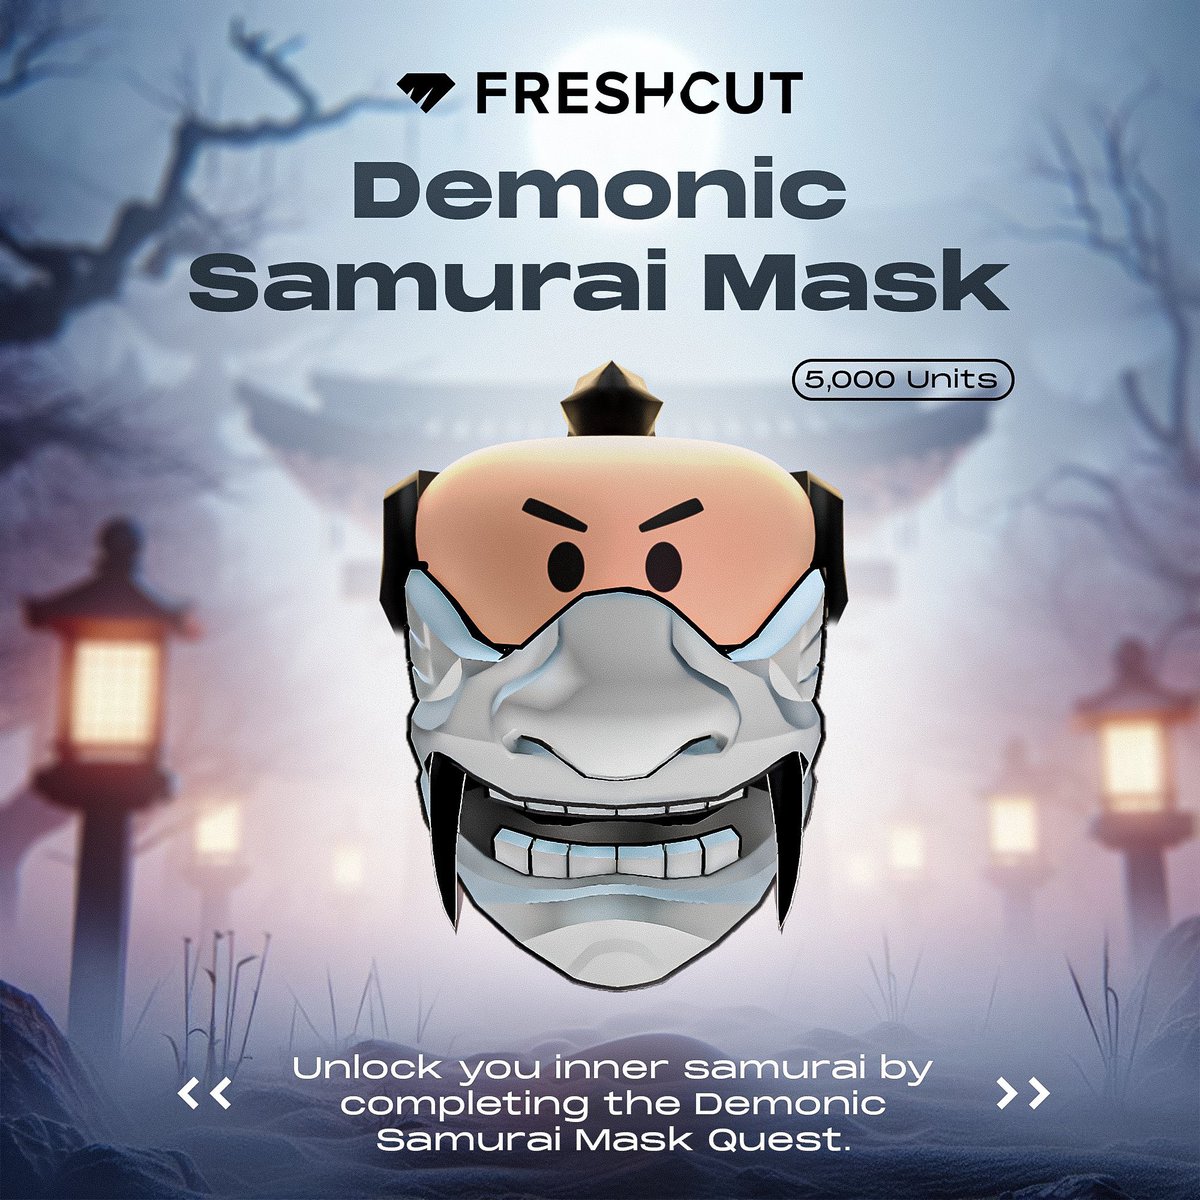 SAMURAI MASK JUST DROPPED 👀
Show us your serials 👀👇